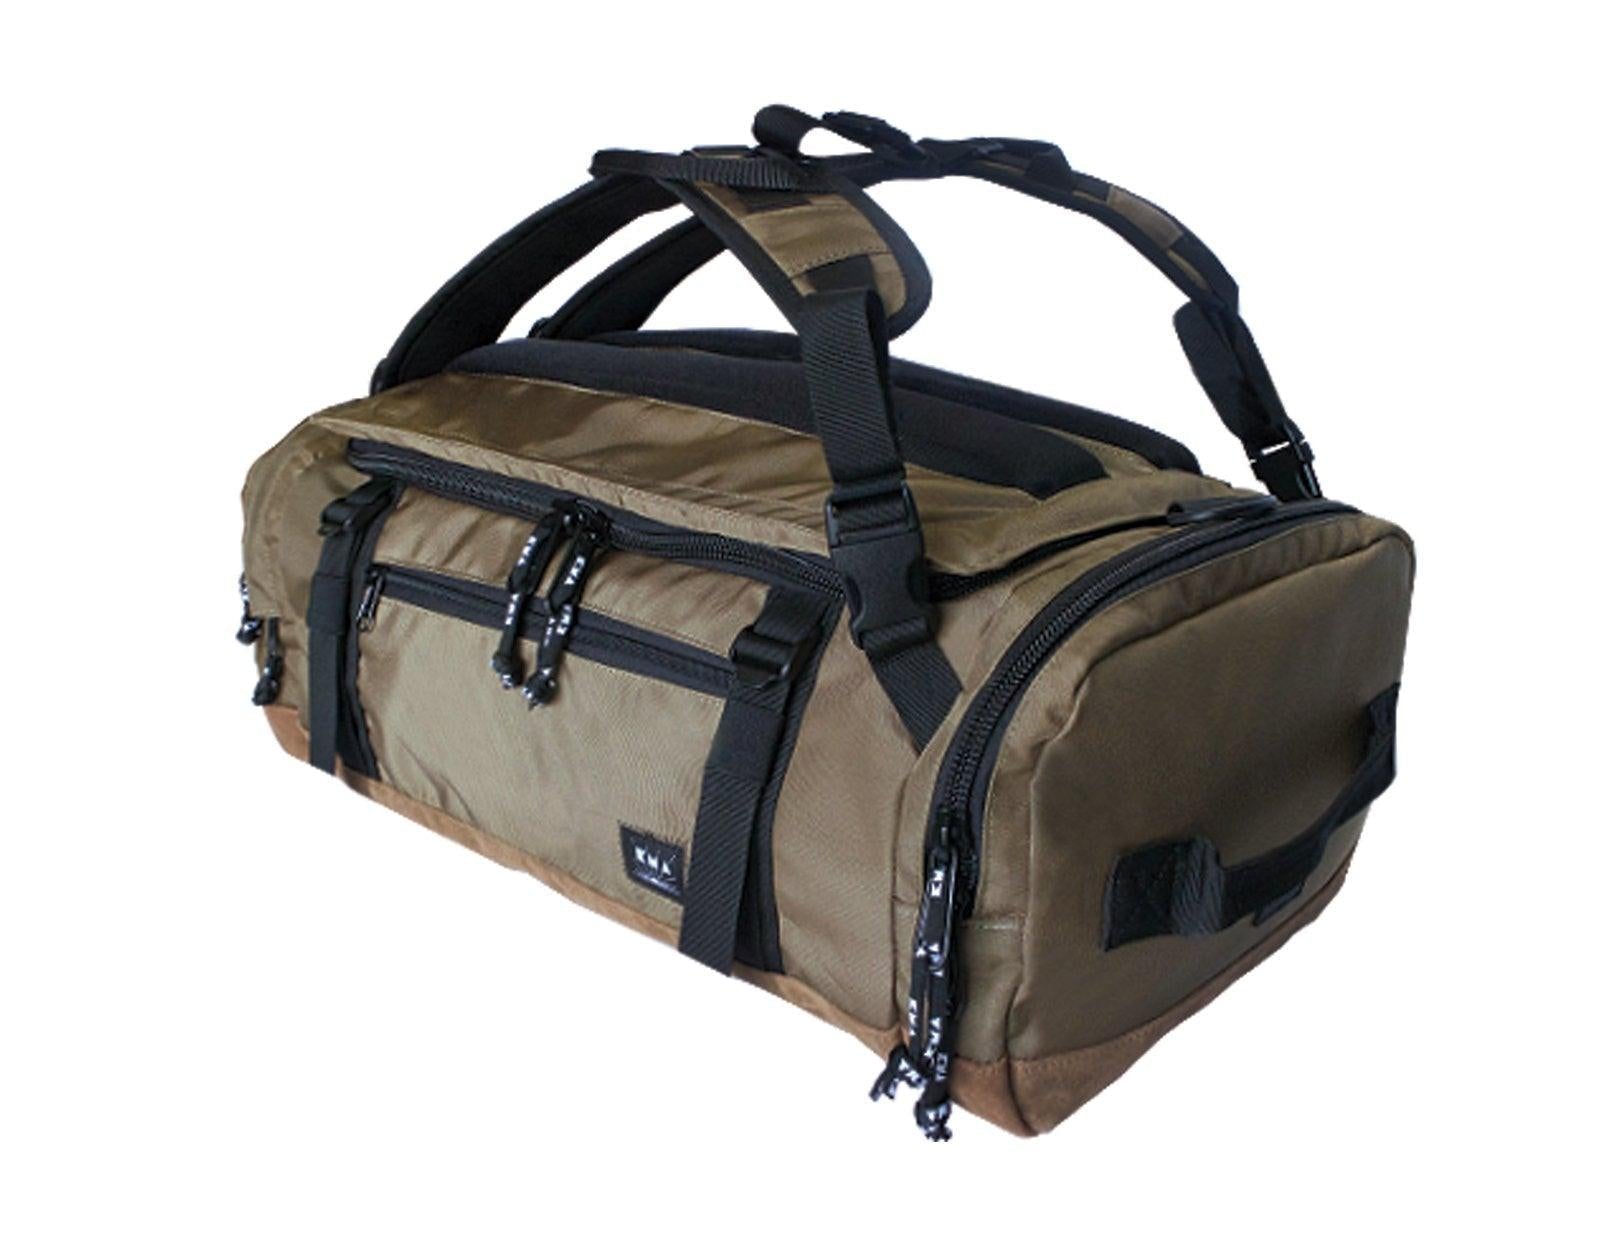 Unplug Ultimate Adventure Bag -1680D Heavy Duty Waterproof Bag for Camping  or Motorcycle Bag. Large Travel Duffle Bag which can be Used as Tactical